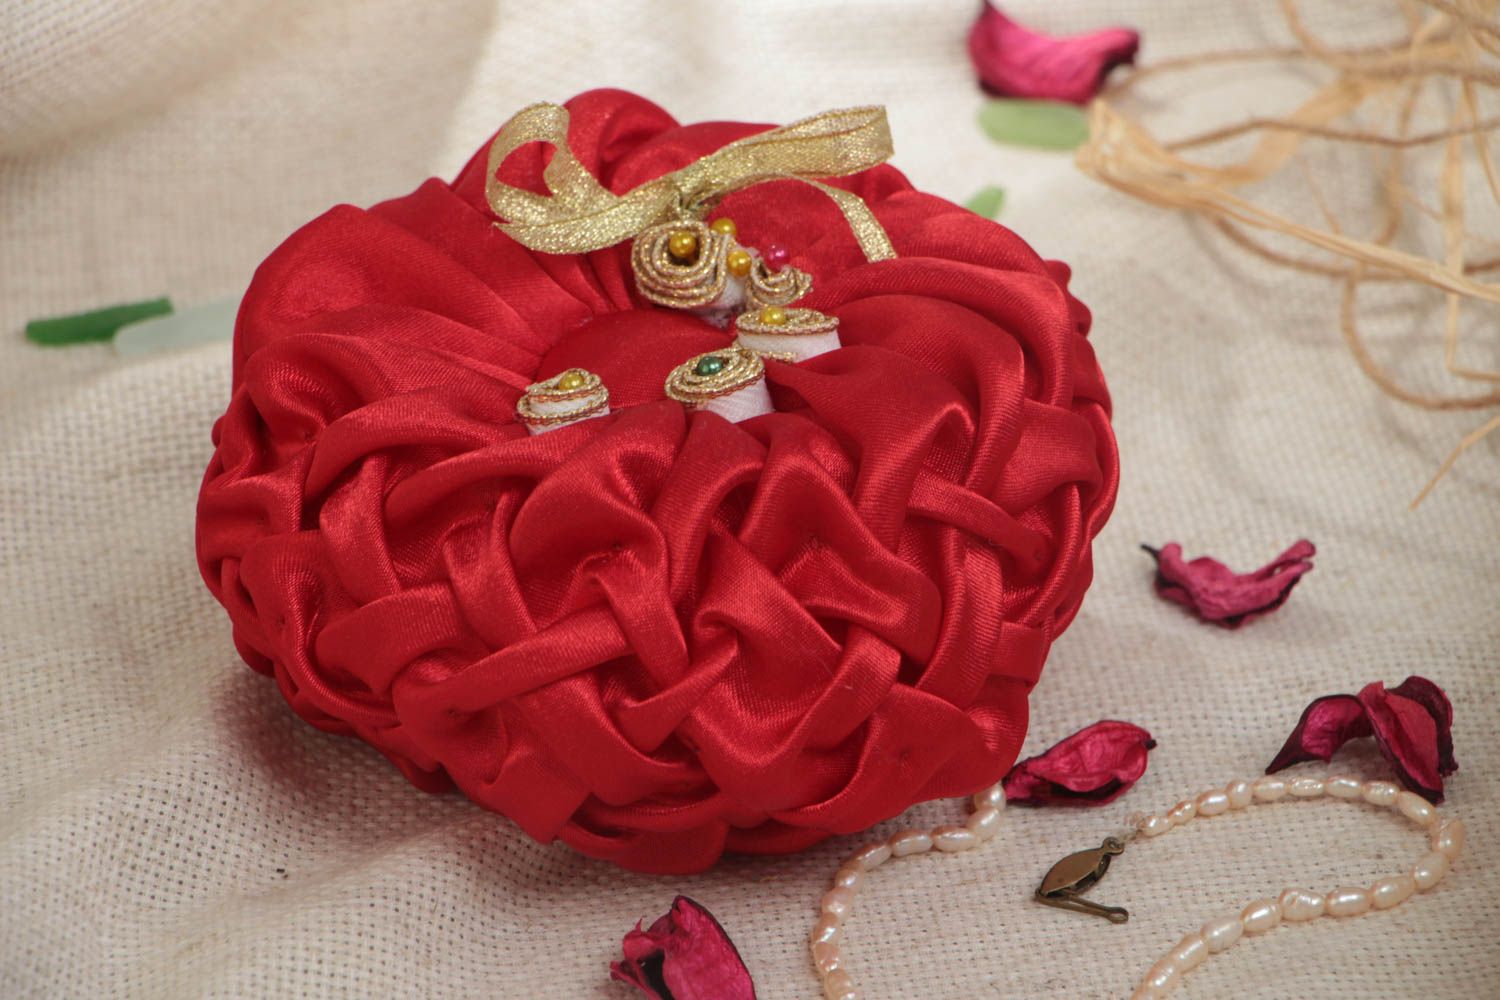 Handmade designer red satin fabric wedding ring pillow with ribbons and beads photo 1